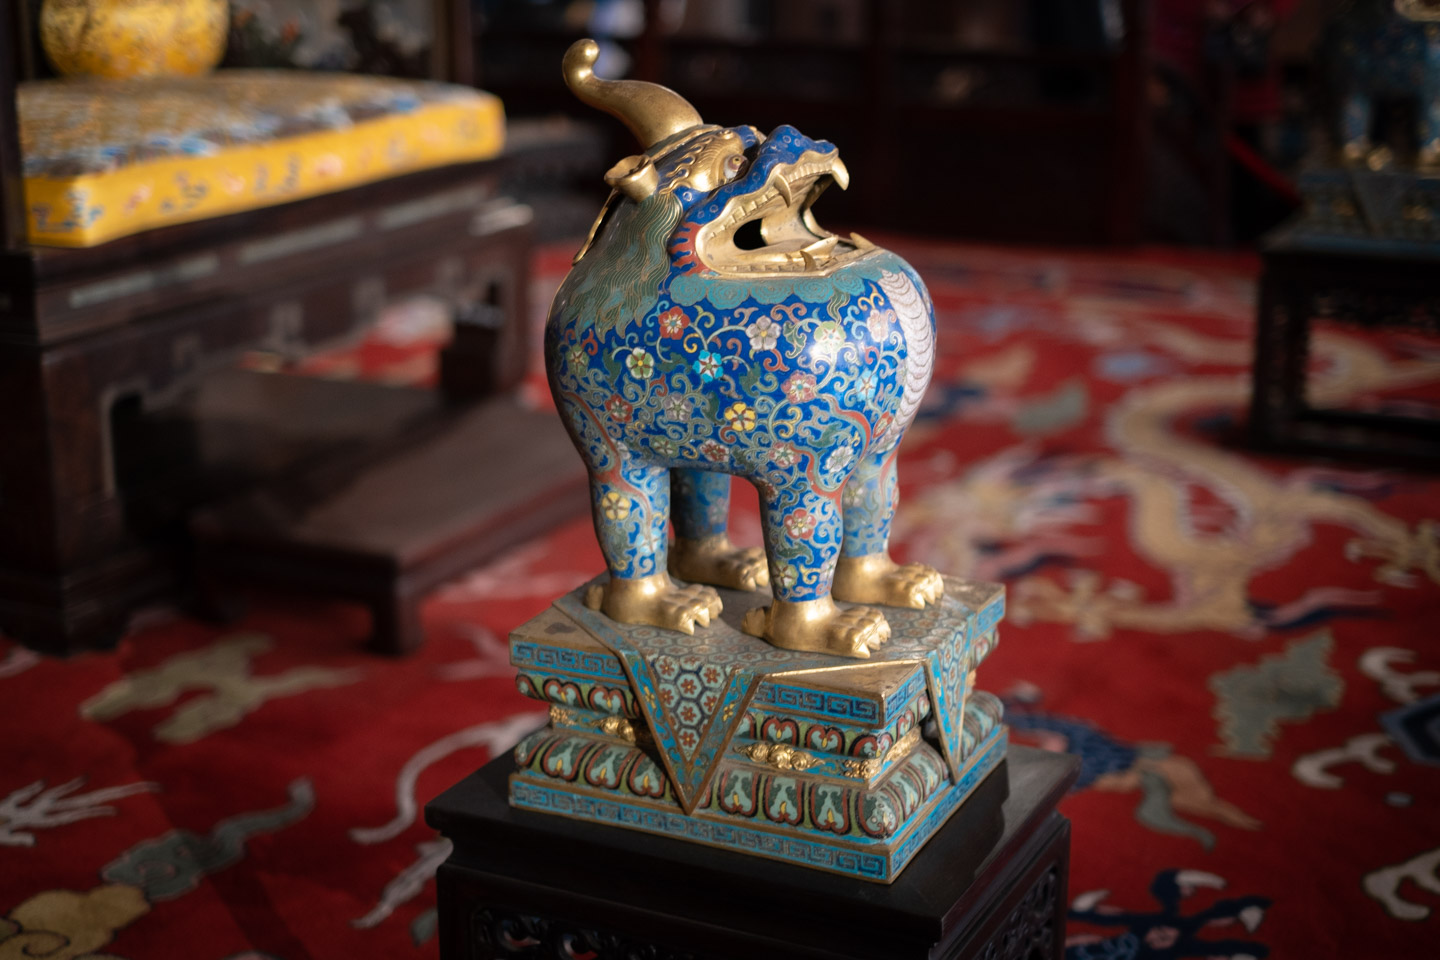 A treasure from the Forbidden City